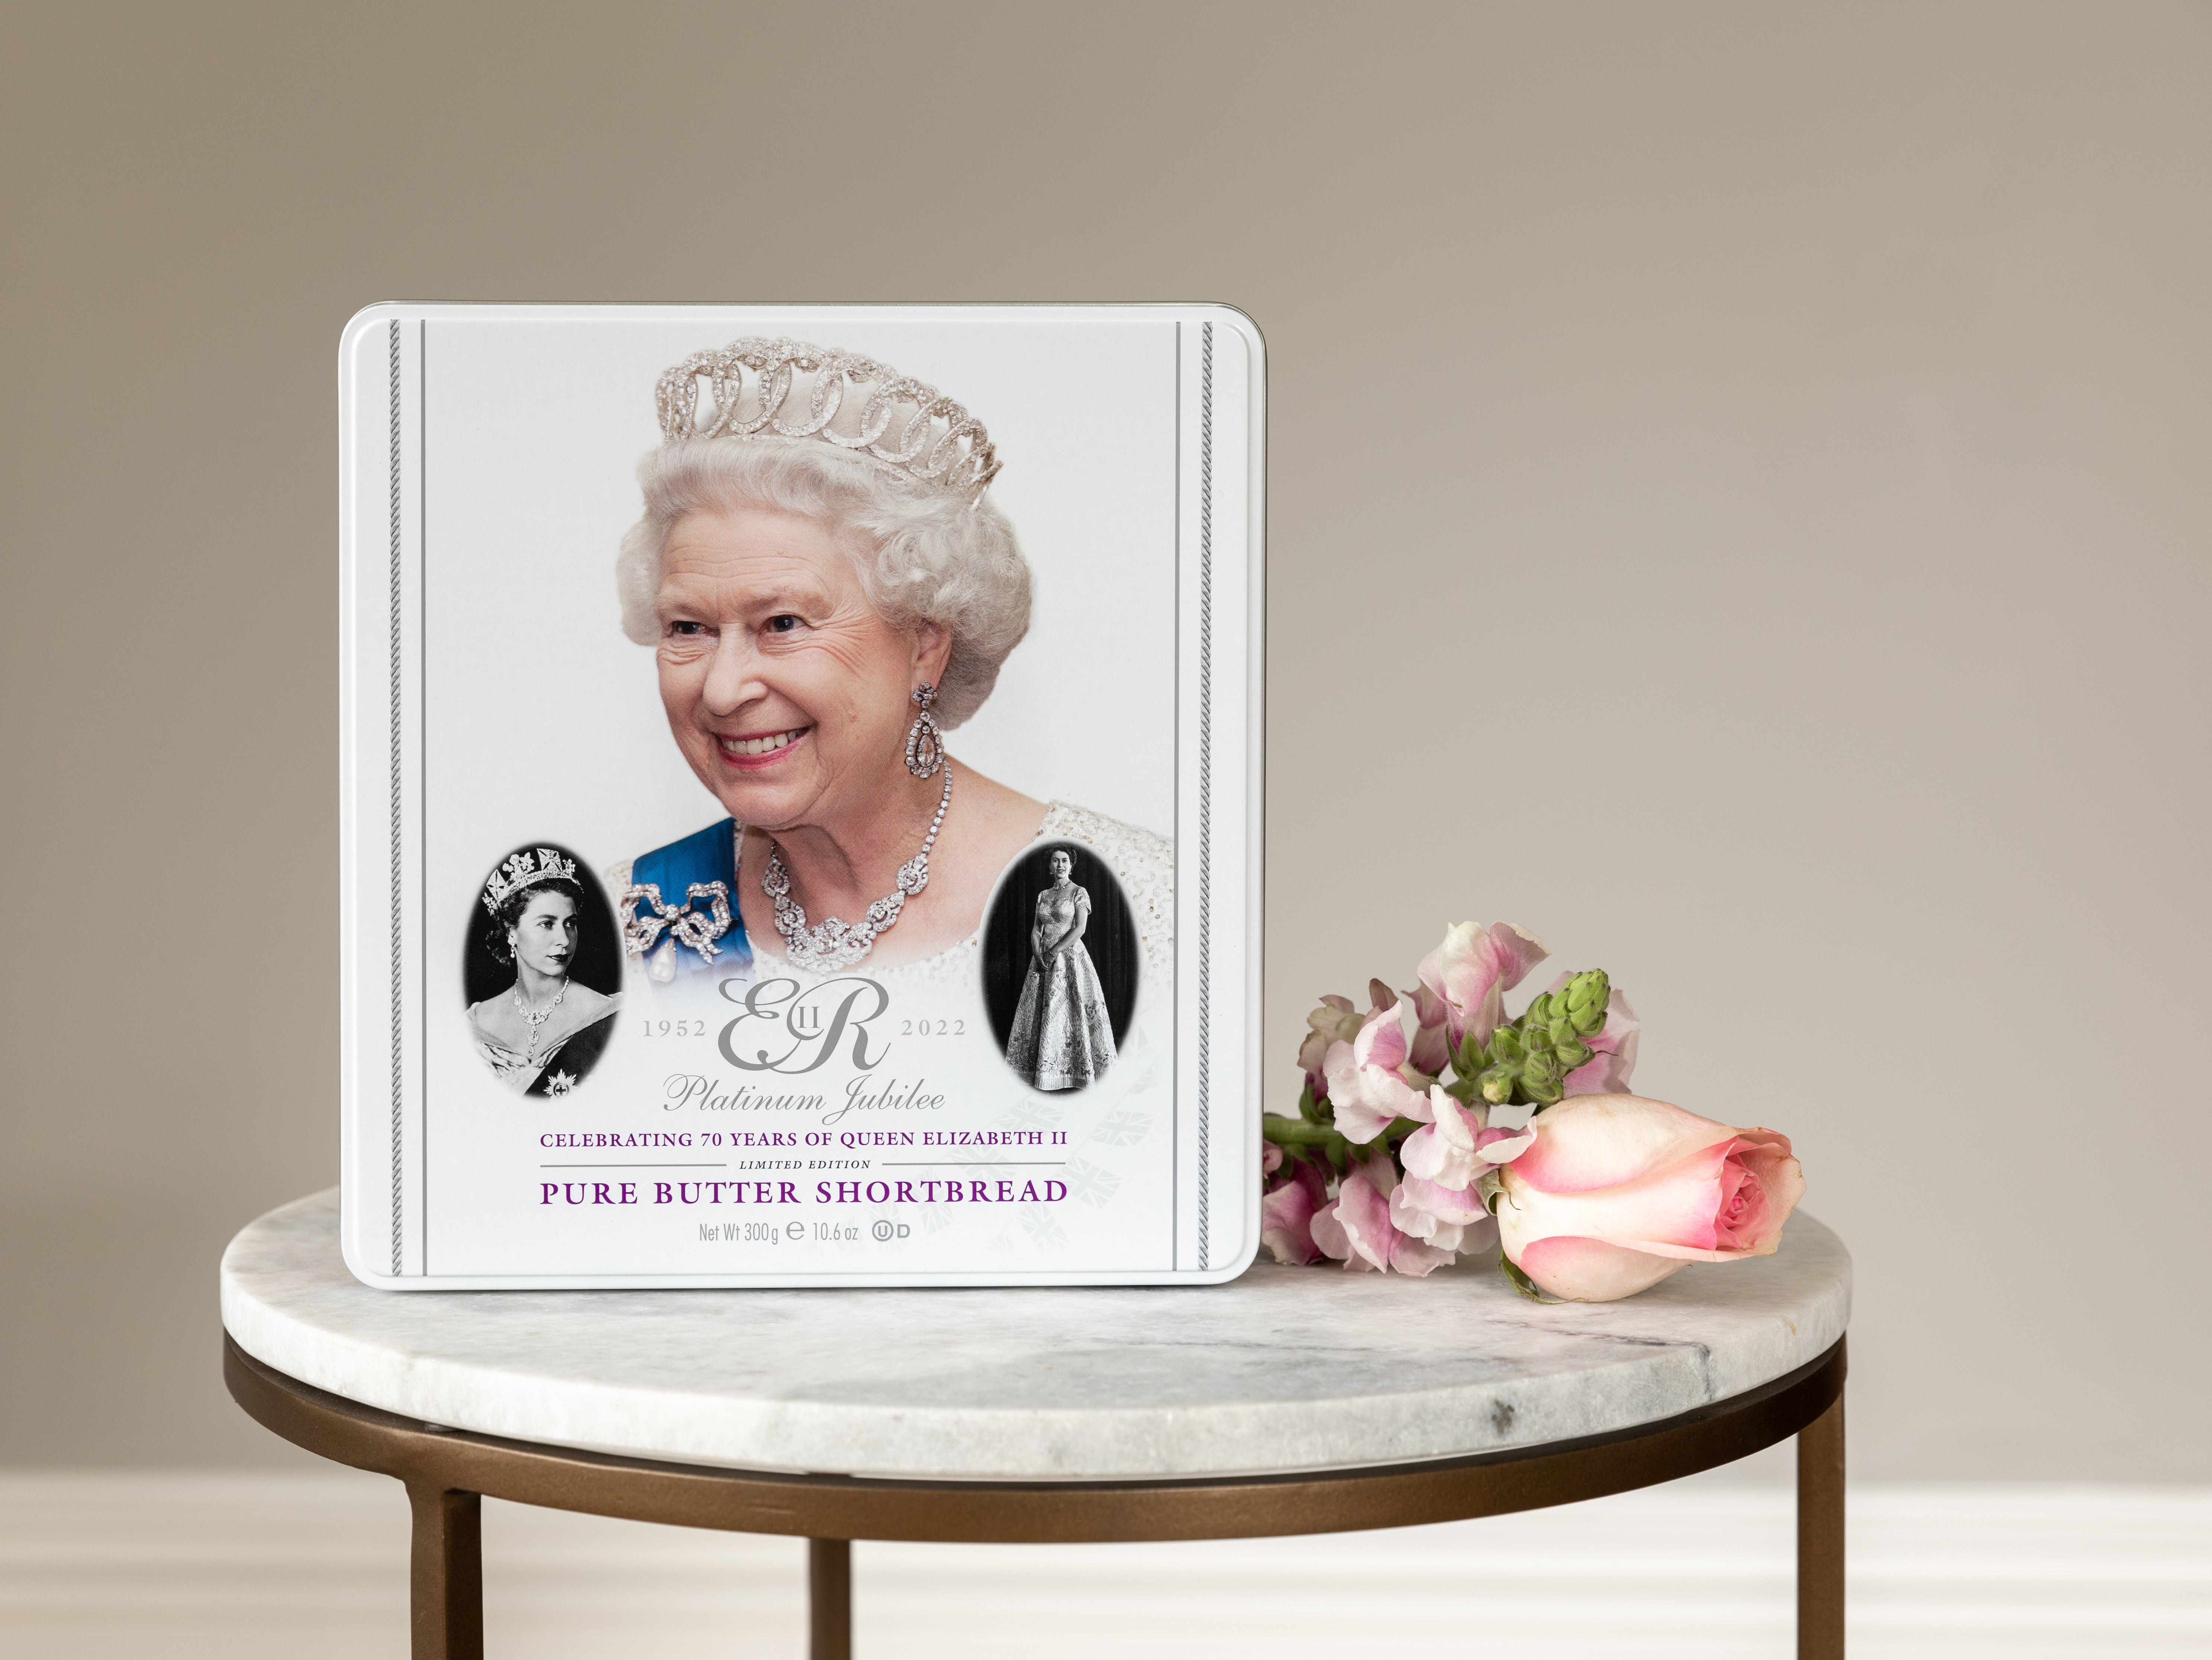 Walker’s Shortbread has launched a commemorative tin for the Queen’s Platinum Jubilee